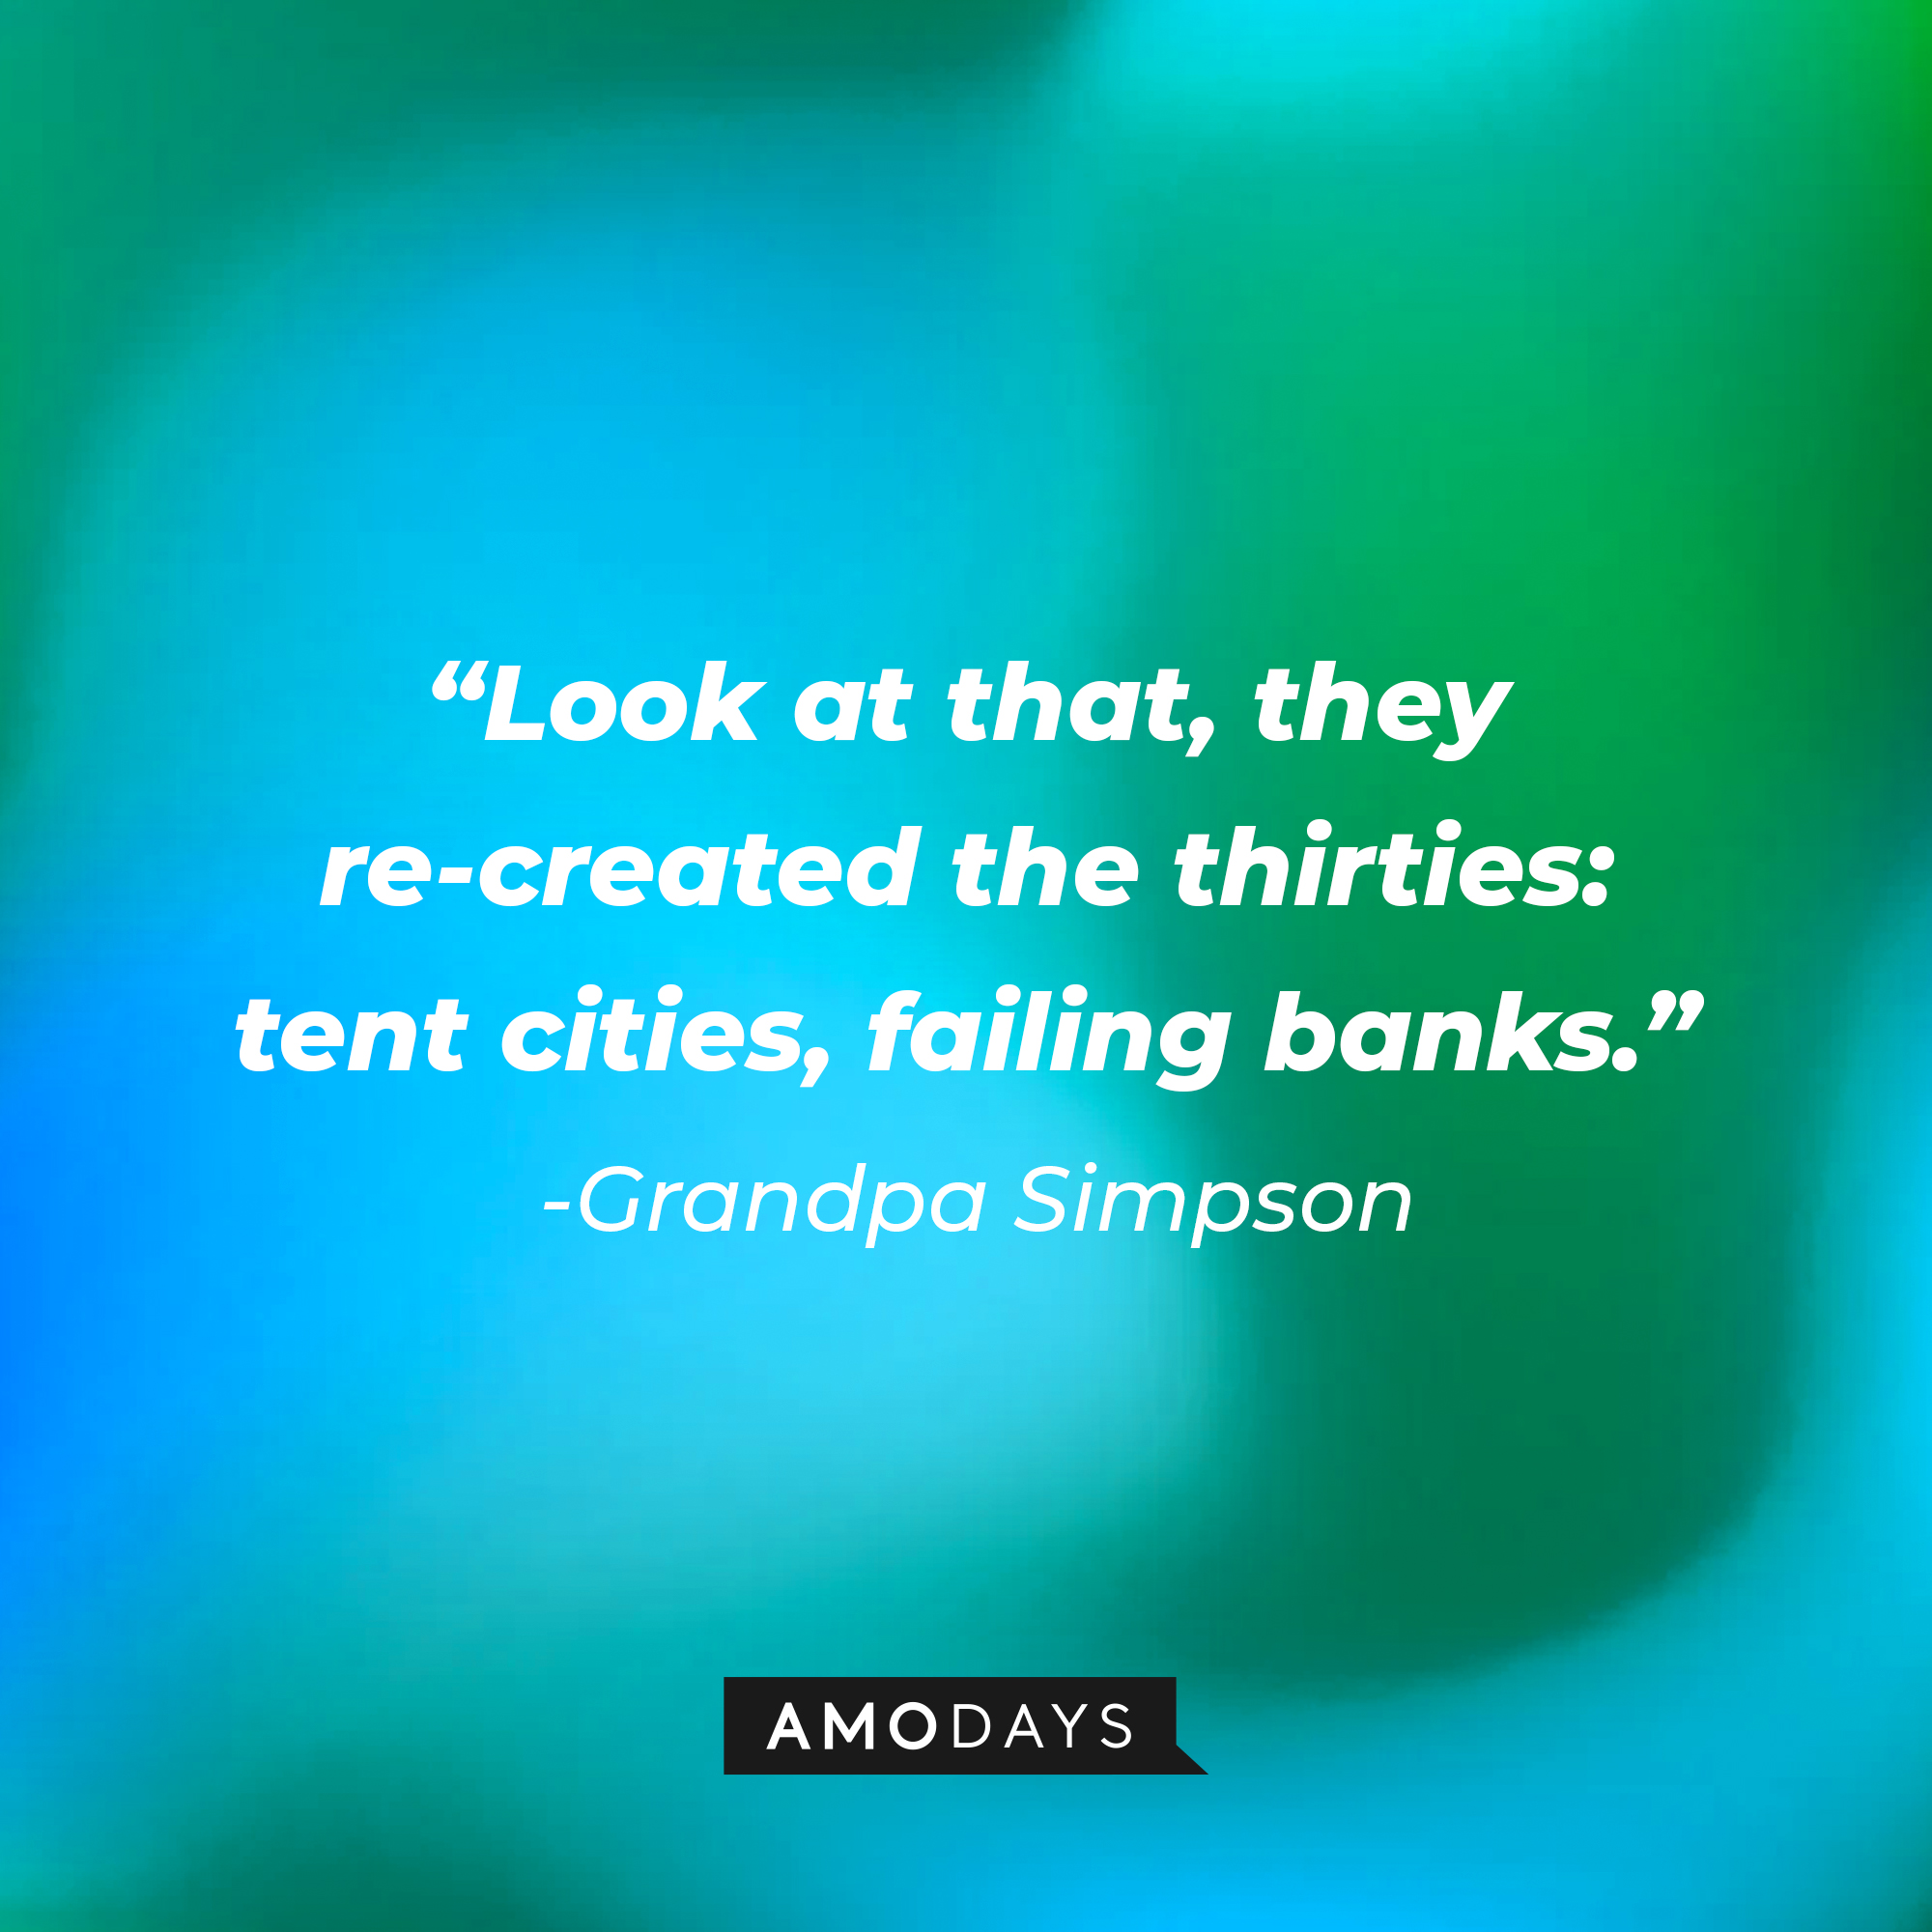 Grandpa Simpson's quote:  “Look at that; they re-created the thirties: tent cities, failing banks.” | Source: AmoDays